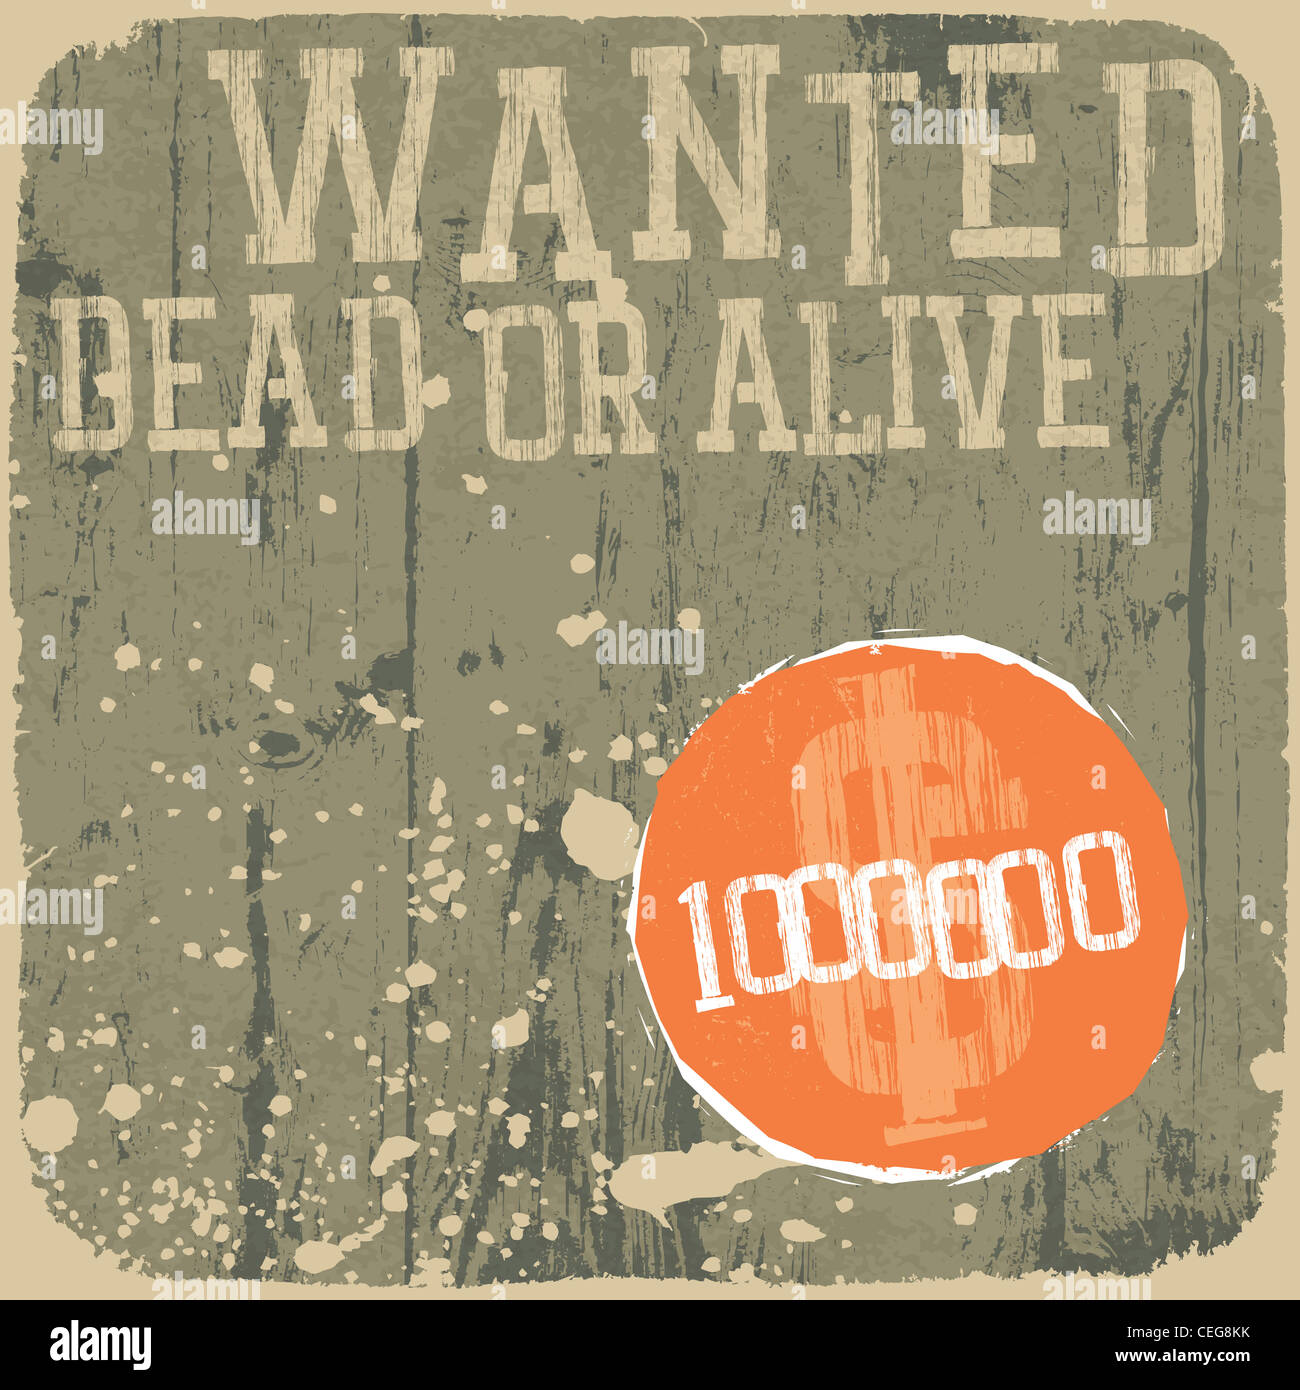 Wanted! Dead or alive. Retro styled poster. Stock Photo